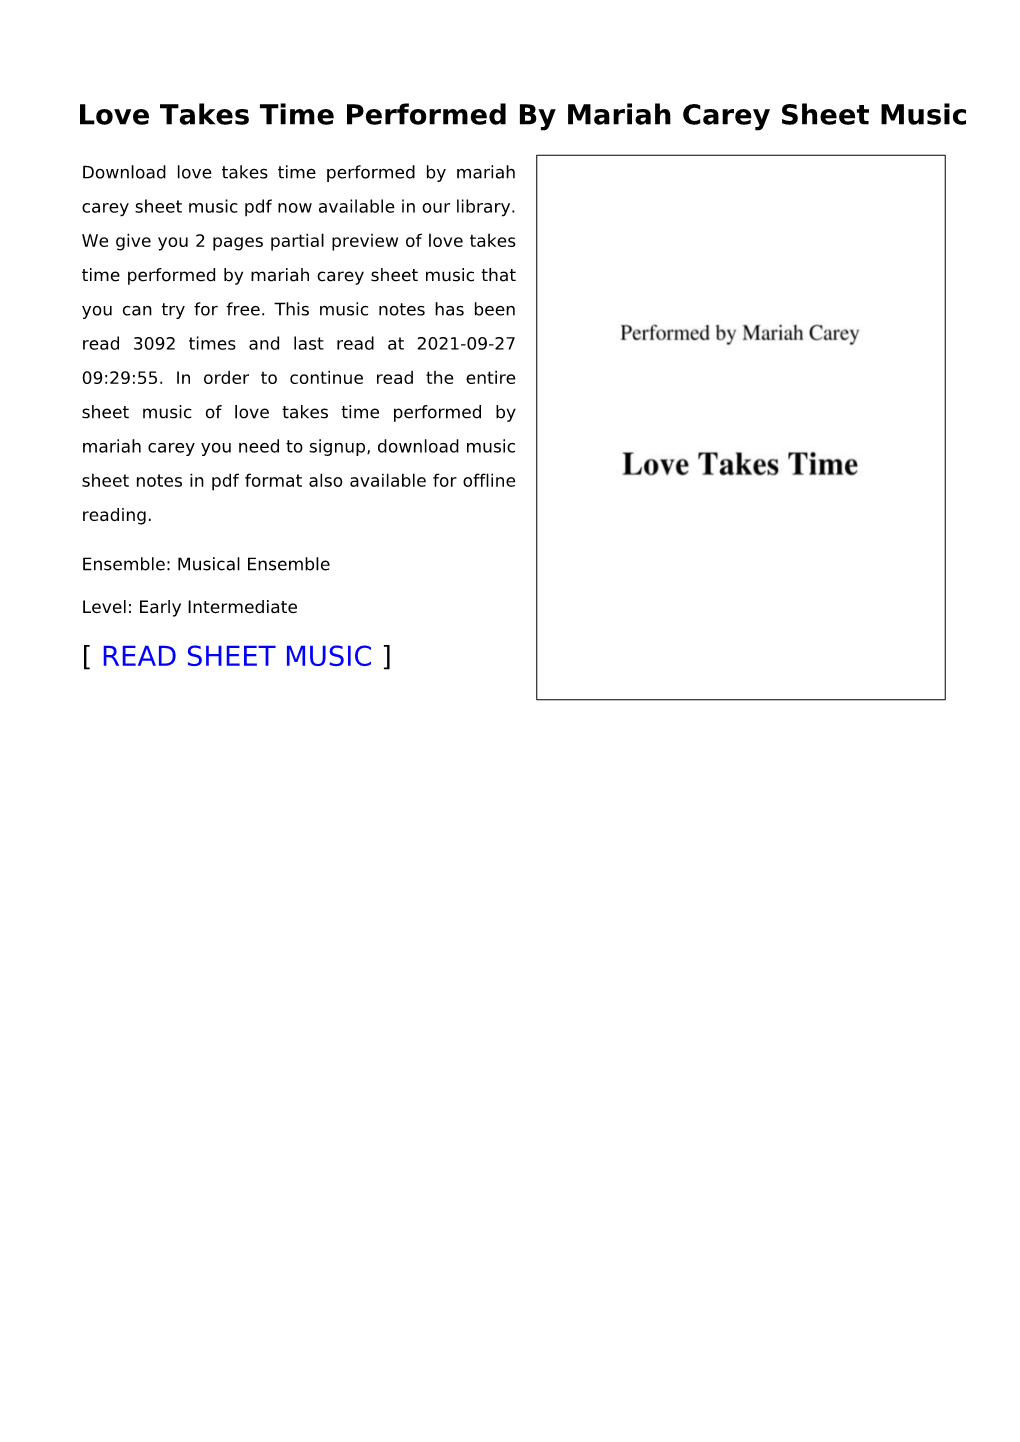 Love Takes Time Performed by Mariah Carey Sheet Music